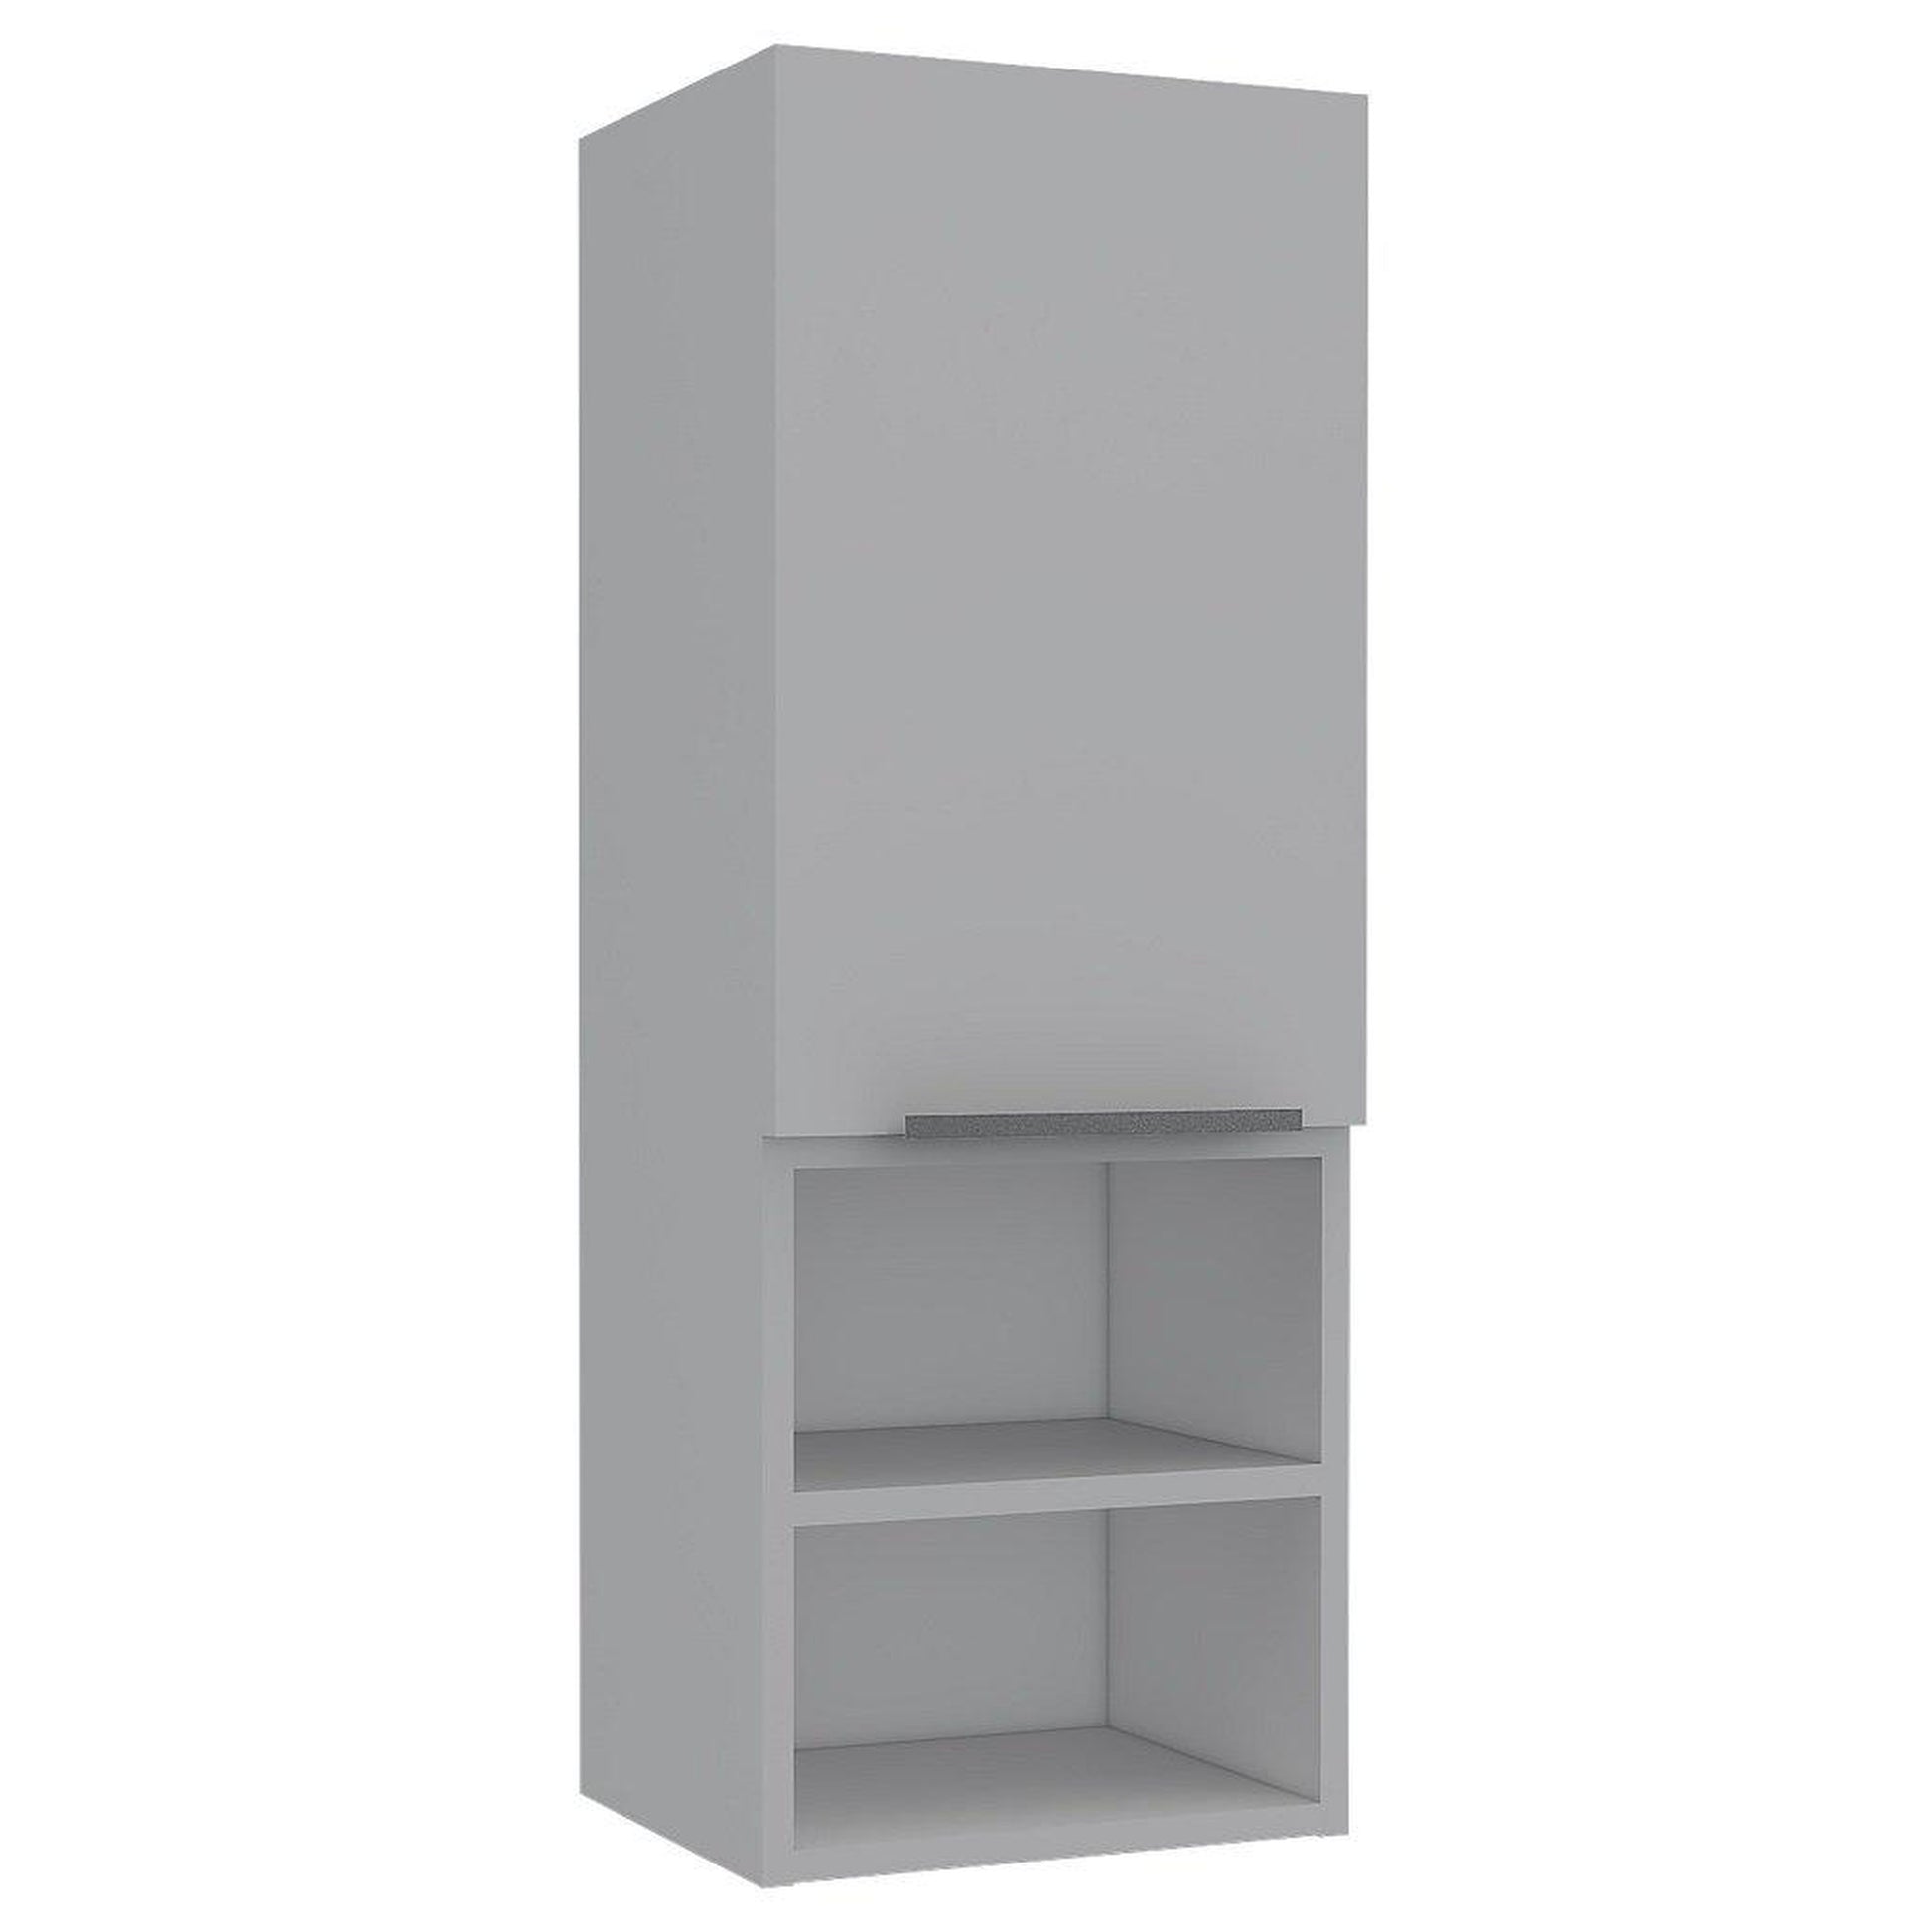 TUHOME Mila 32" White Wall-Mounted Cabinet With 2 Open Shelves